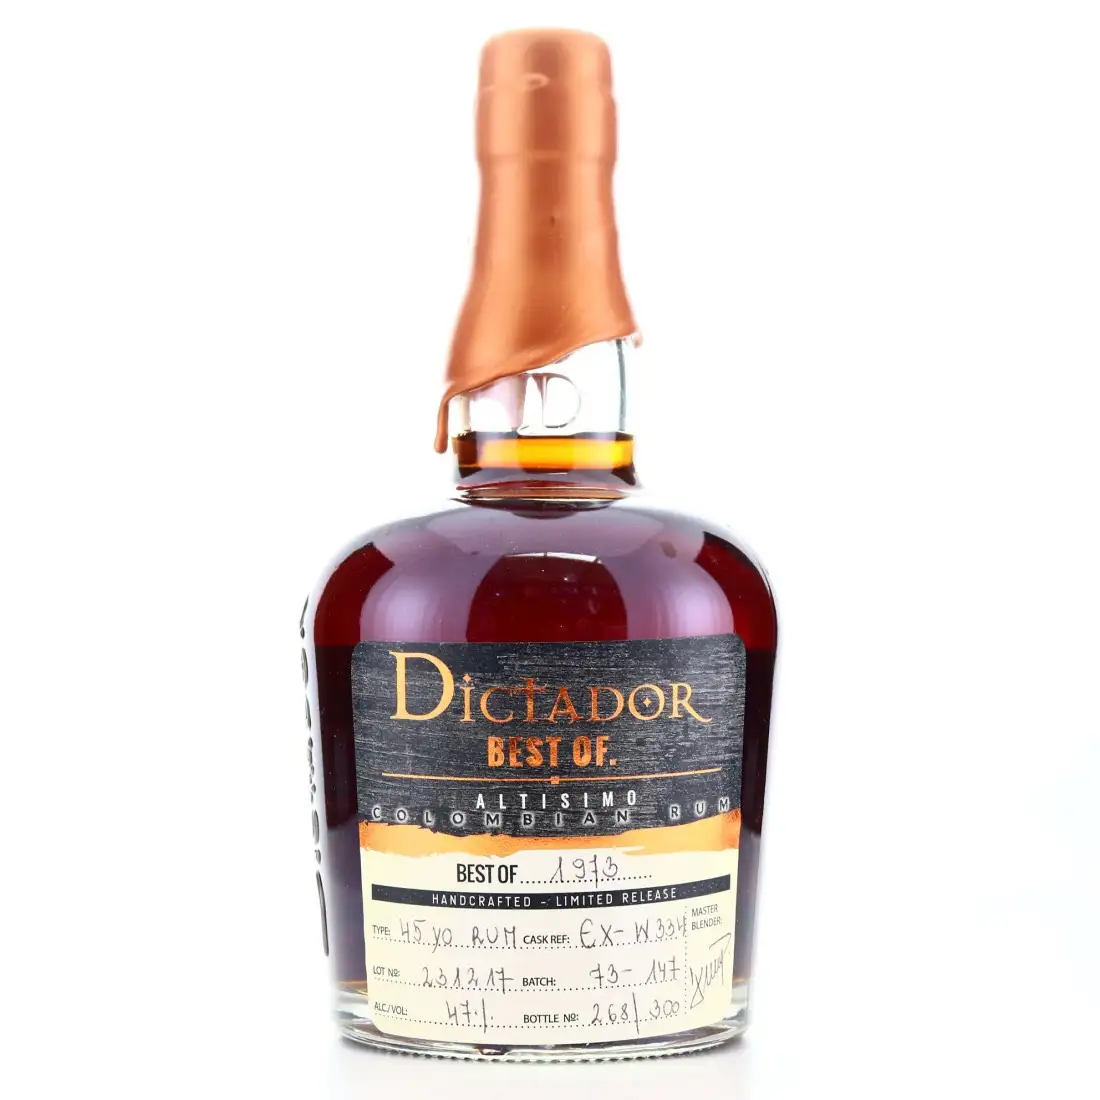 Image of the front of the bottle of the rum Dictador Best Of